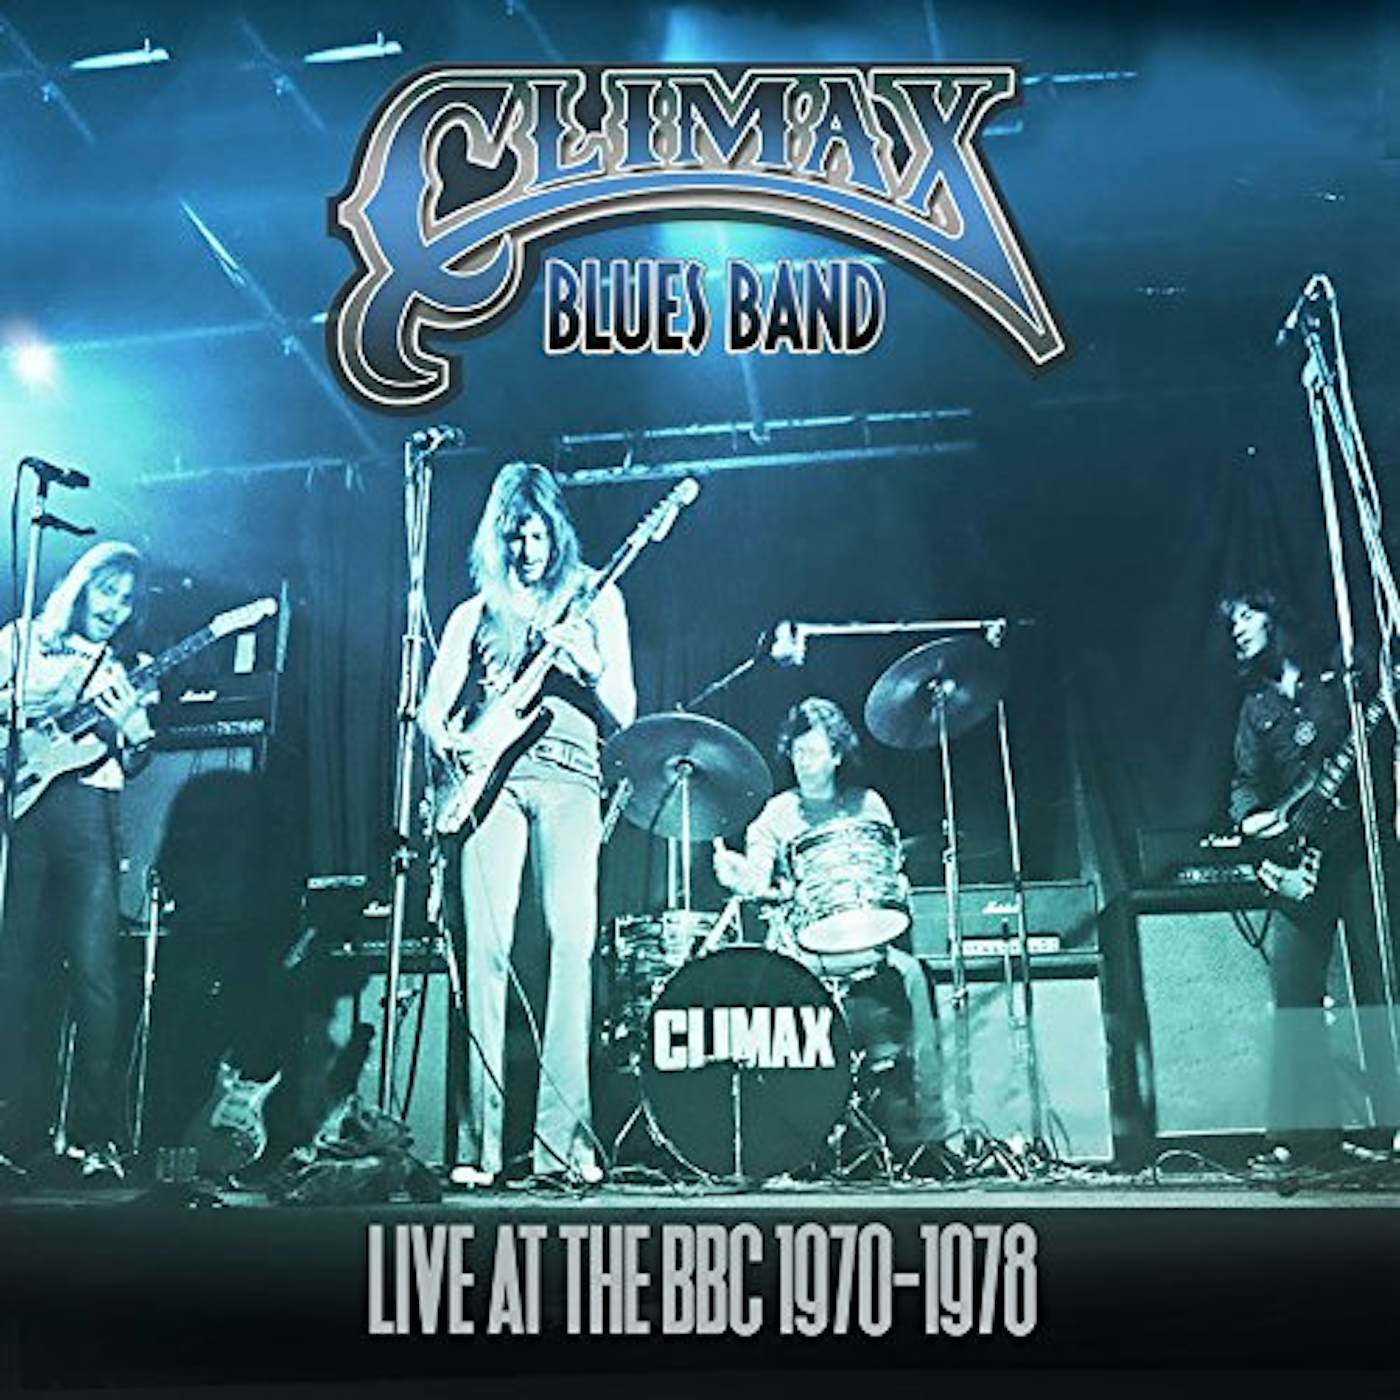 Climax Blues Band LIVE AT THE BBC 1970-1978 CD